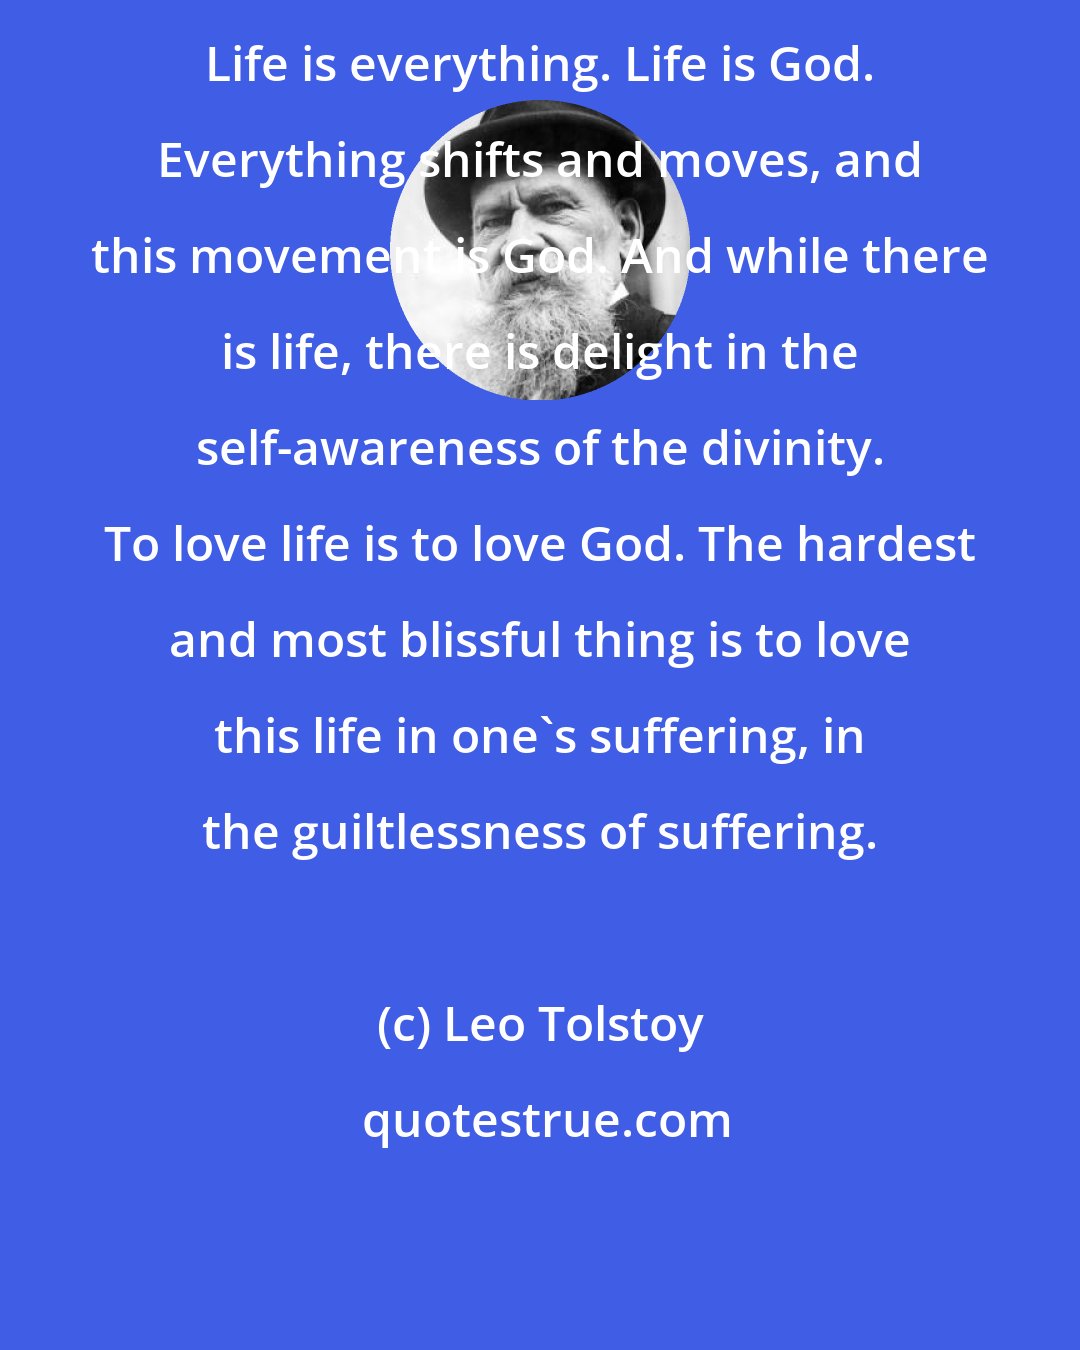 Leo Tolstoy: Life is everything. Life is God. Everything shifts and moves, and this movement is God. And while there is life, there is delight in the self-awareness of the divinity. To love life is to love God. The hardest and most blissful thing is to love this life in one's suffering, in the guiltlessness of suffering.